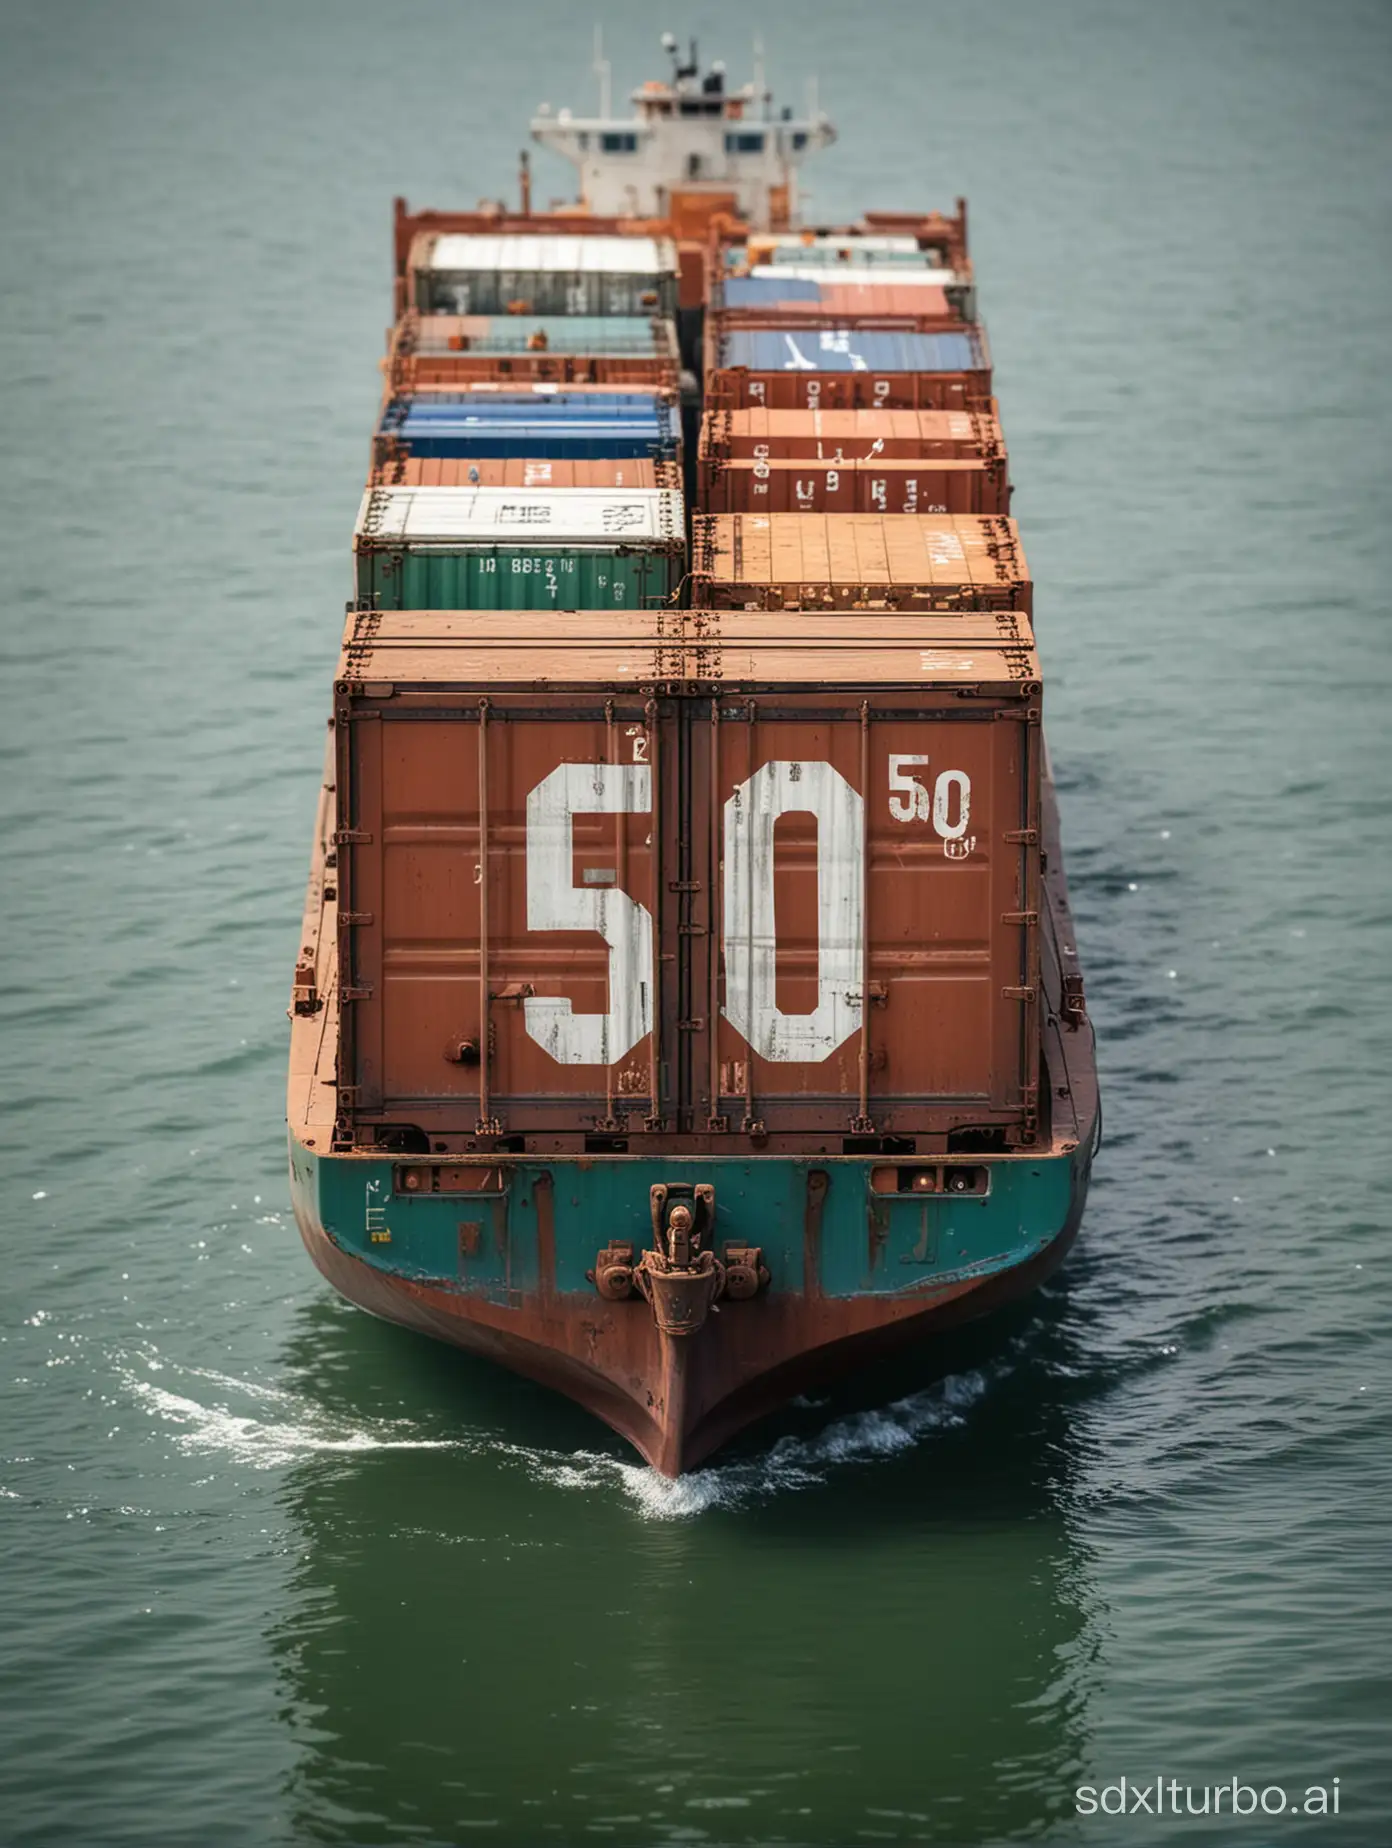 Micro-landscape, dock, container, the number 50 is written on the container, sea, ship,